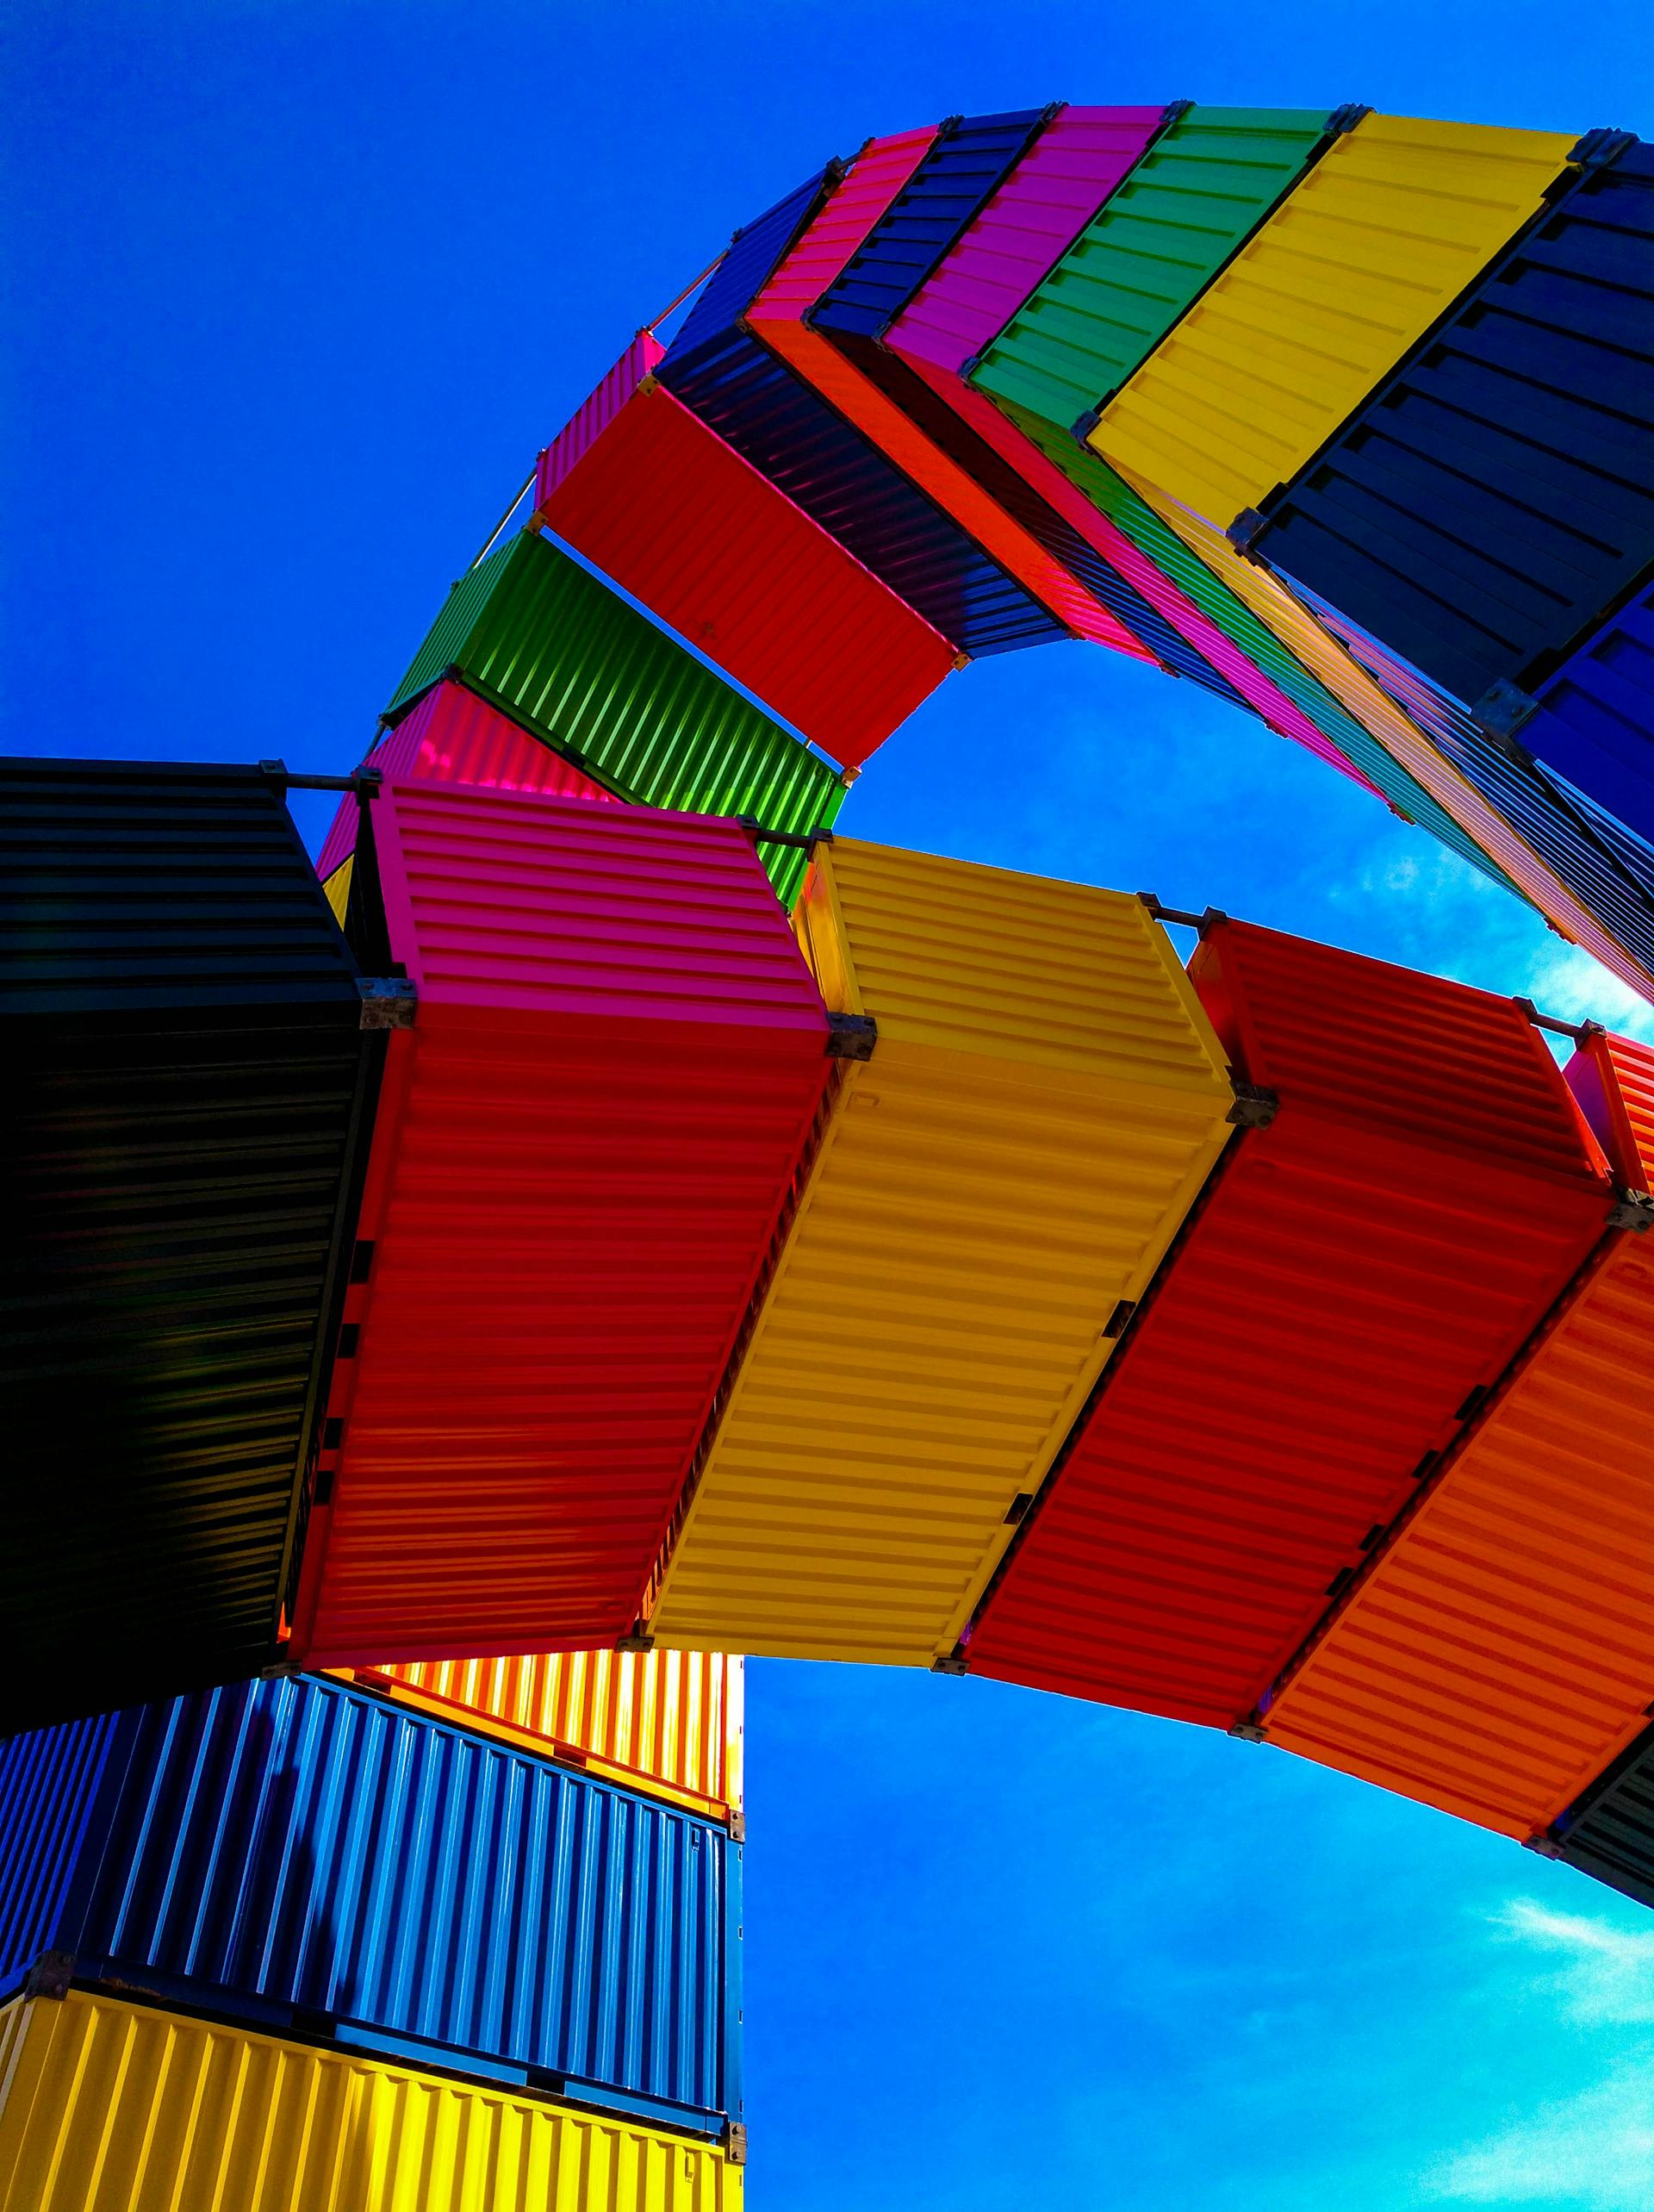 Image of colorful cargo boxes arranged in curved shapes